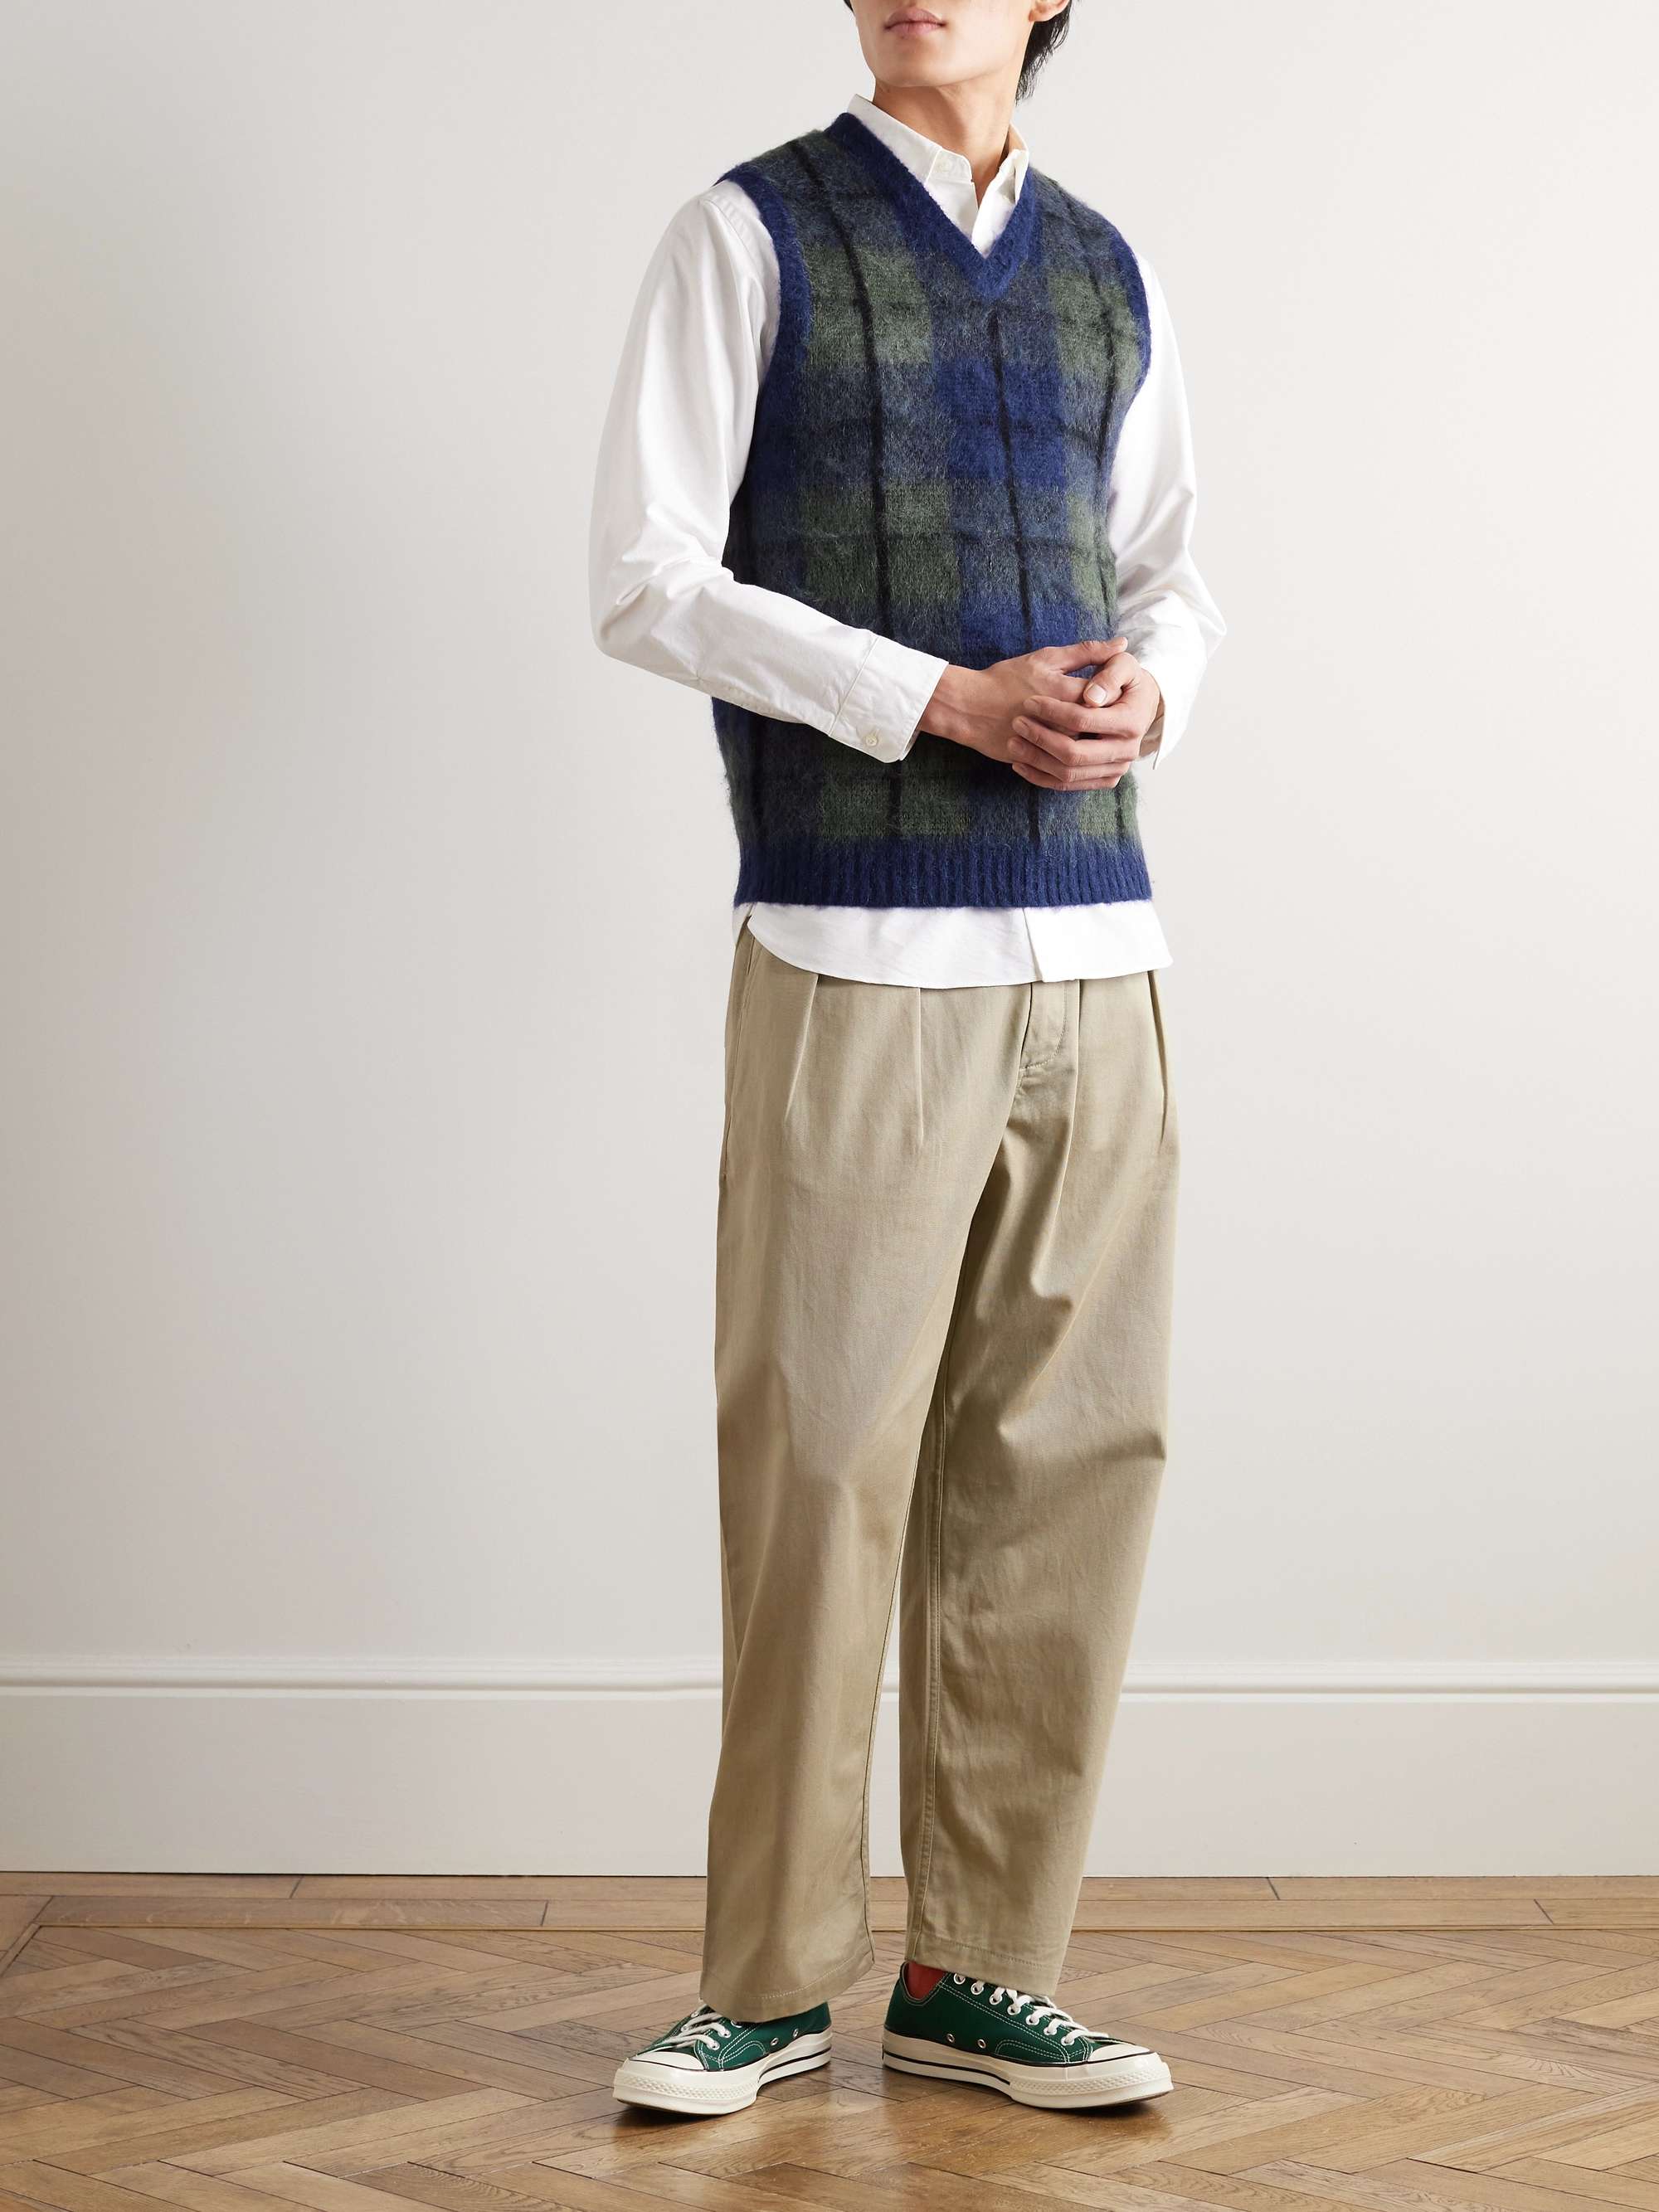 Checked Knitted Sweater Vest